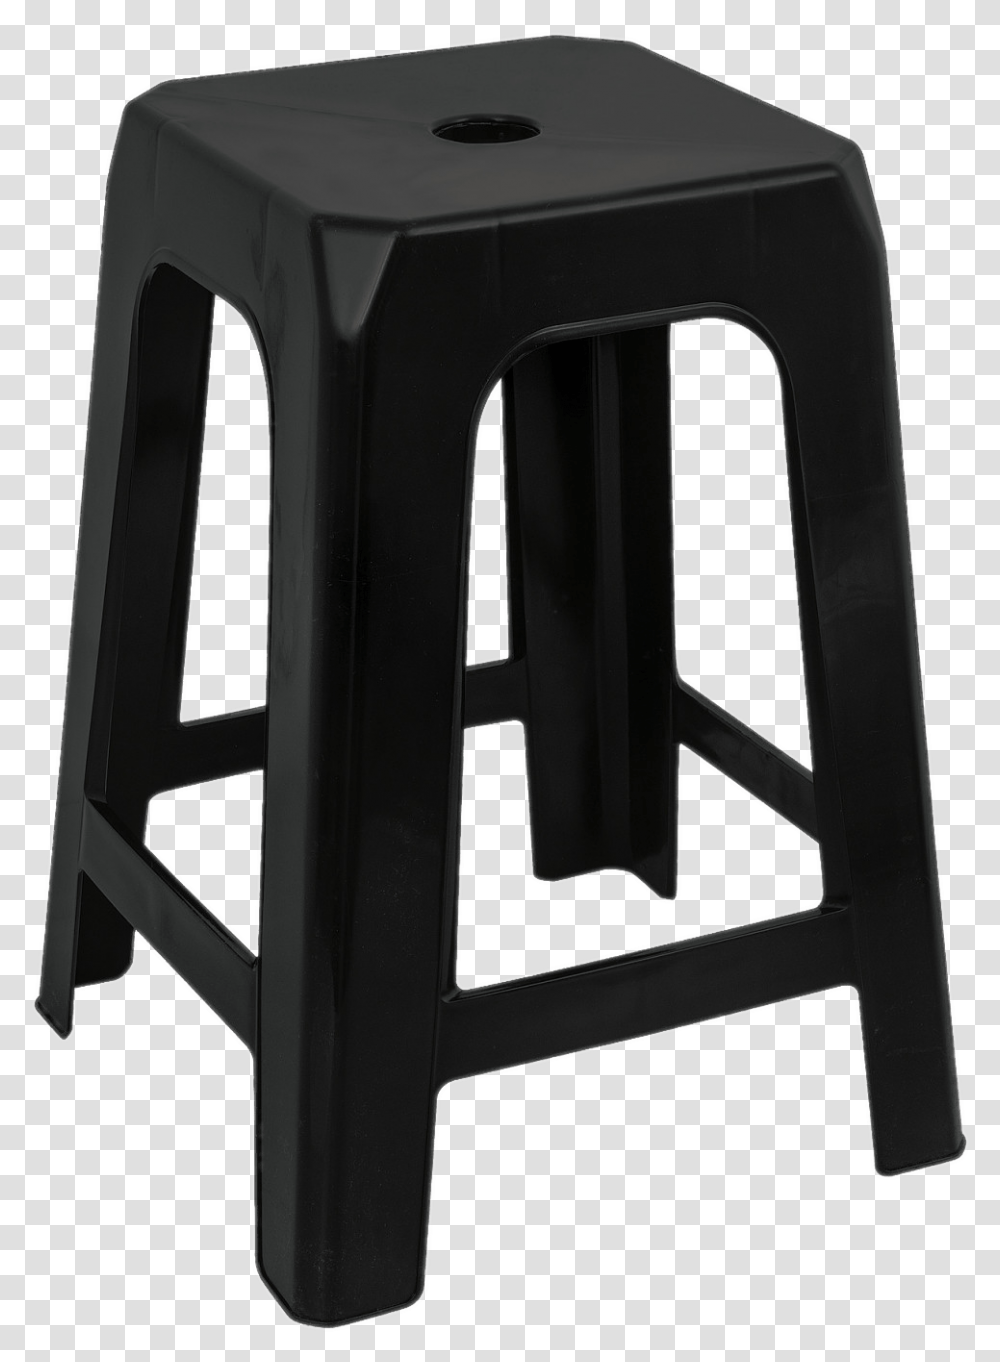 Plastic Stool Lowest Price, Furniture, Chair, Table, Mailbox Transparent Png